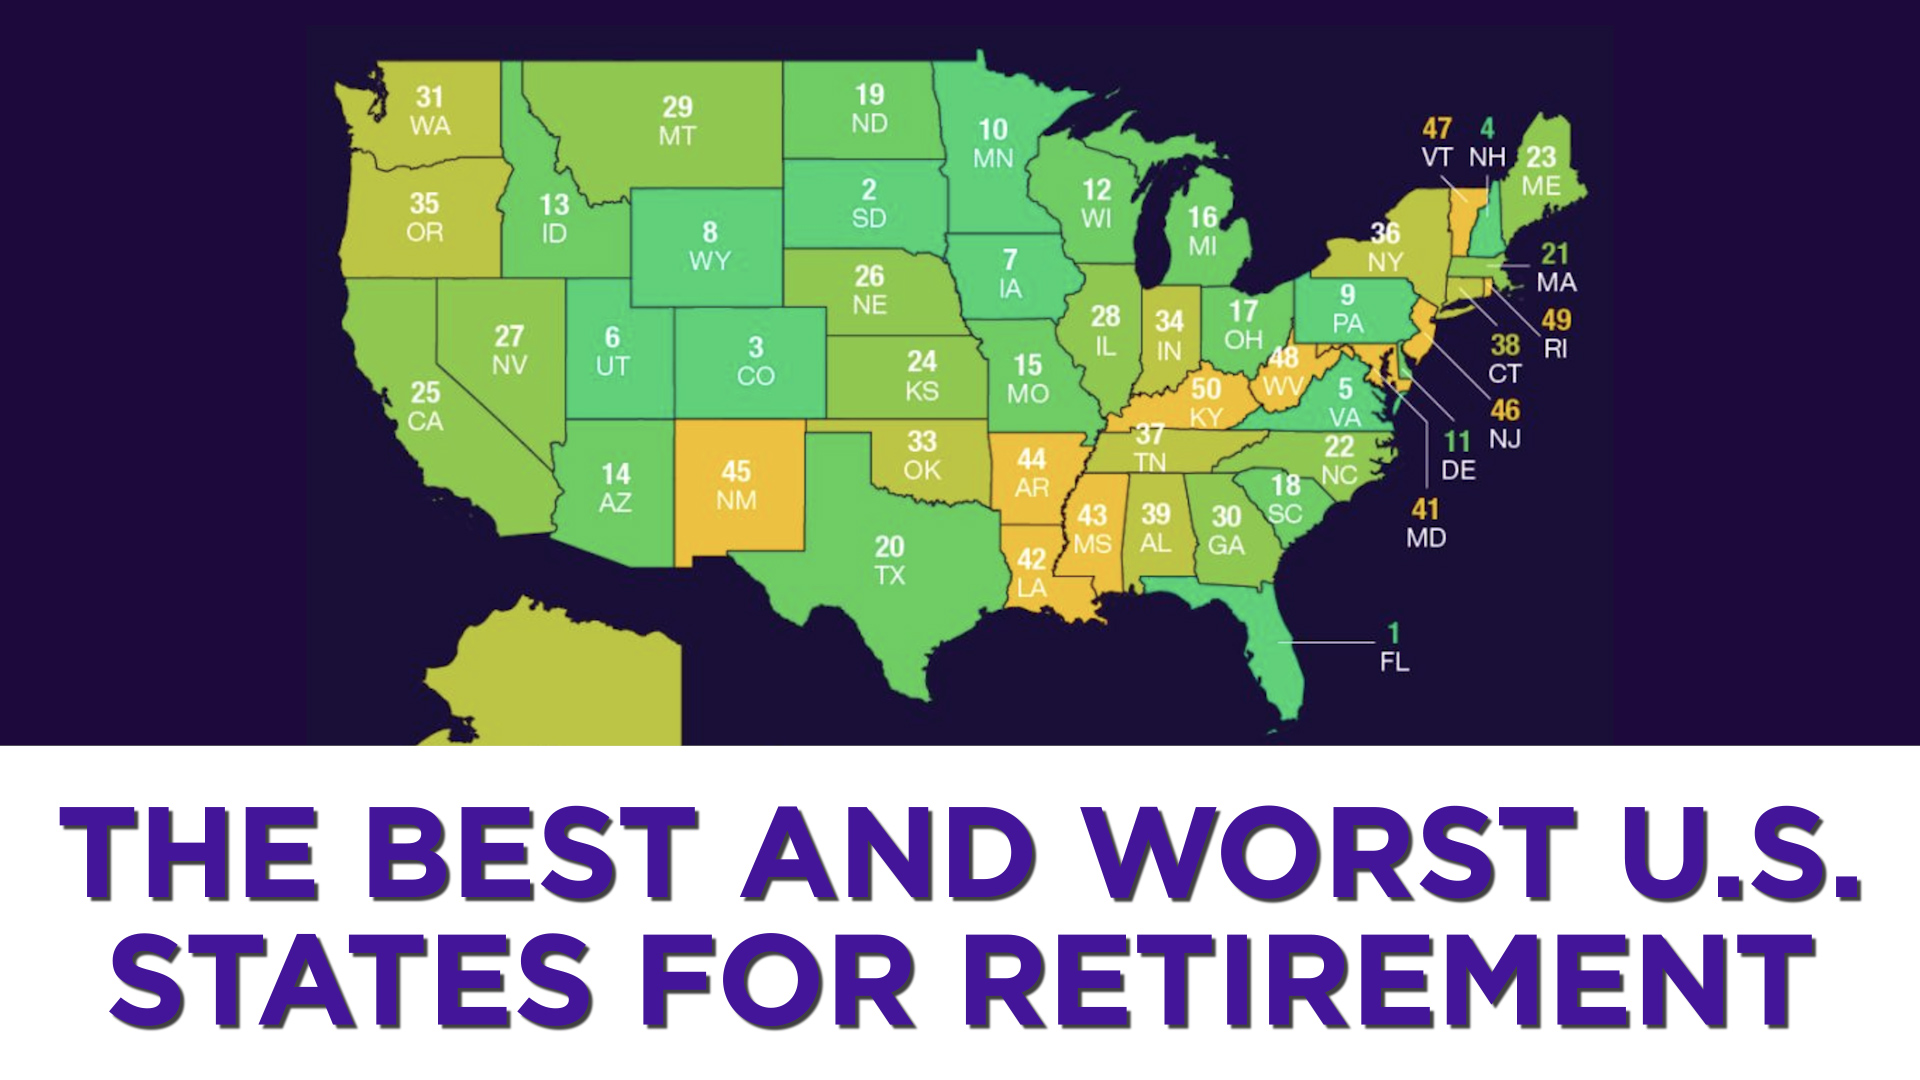 The best and worst U.S. states for retirement